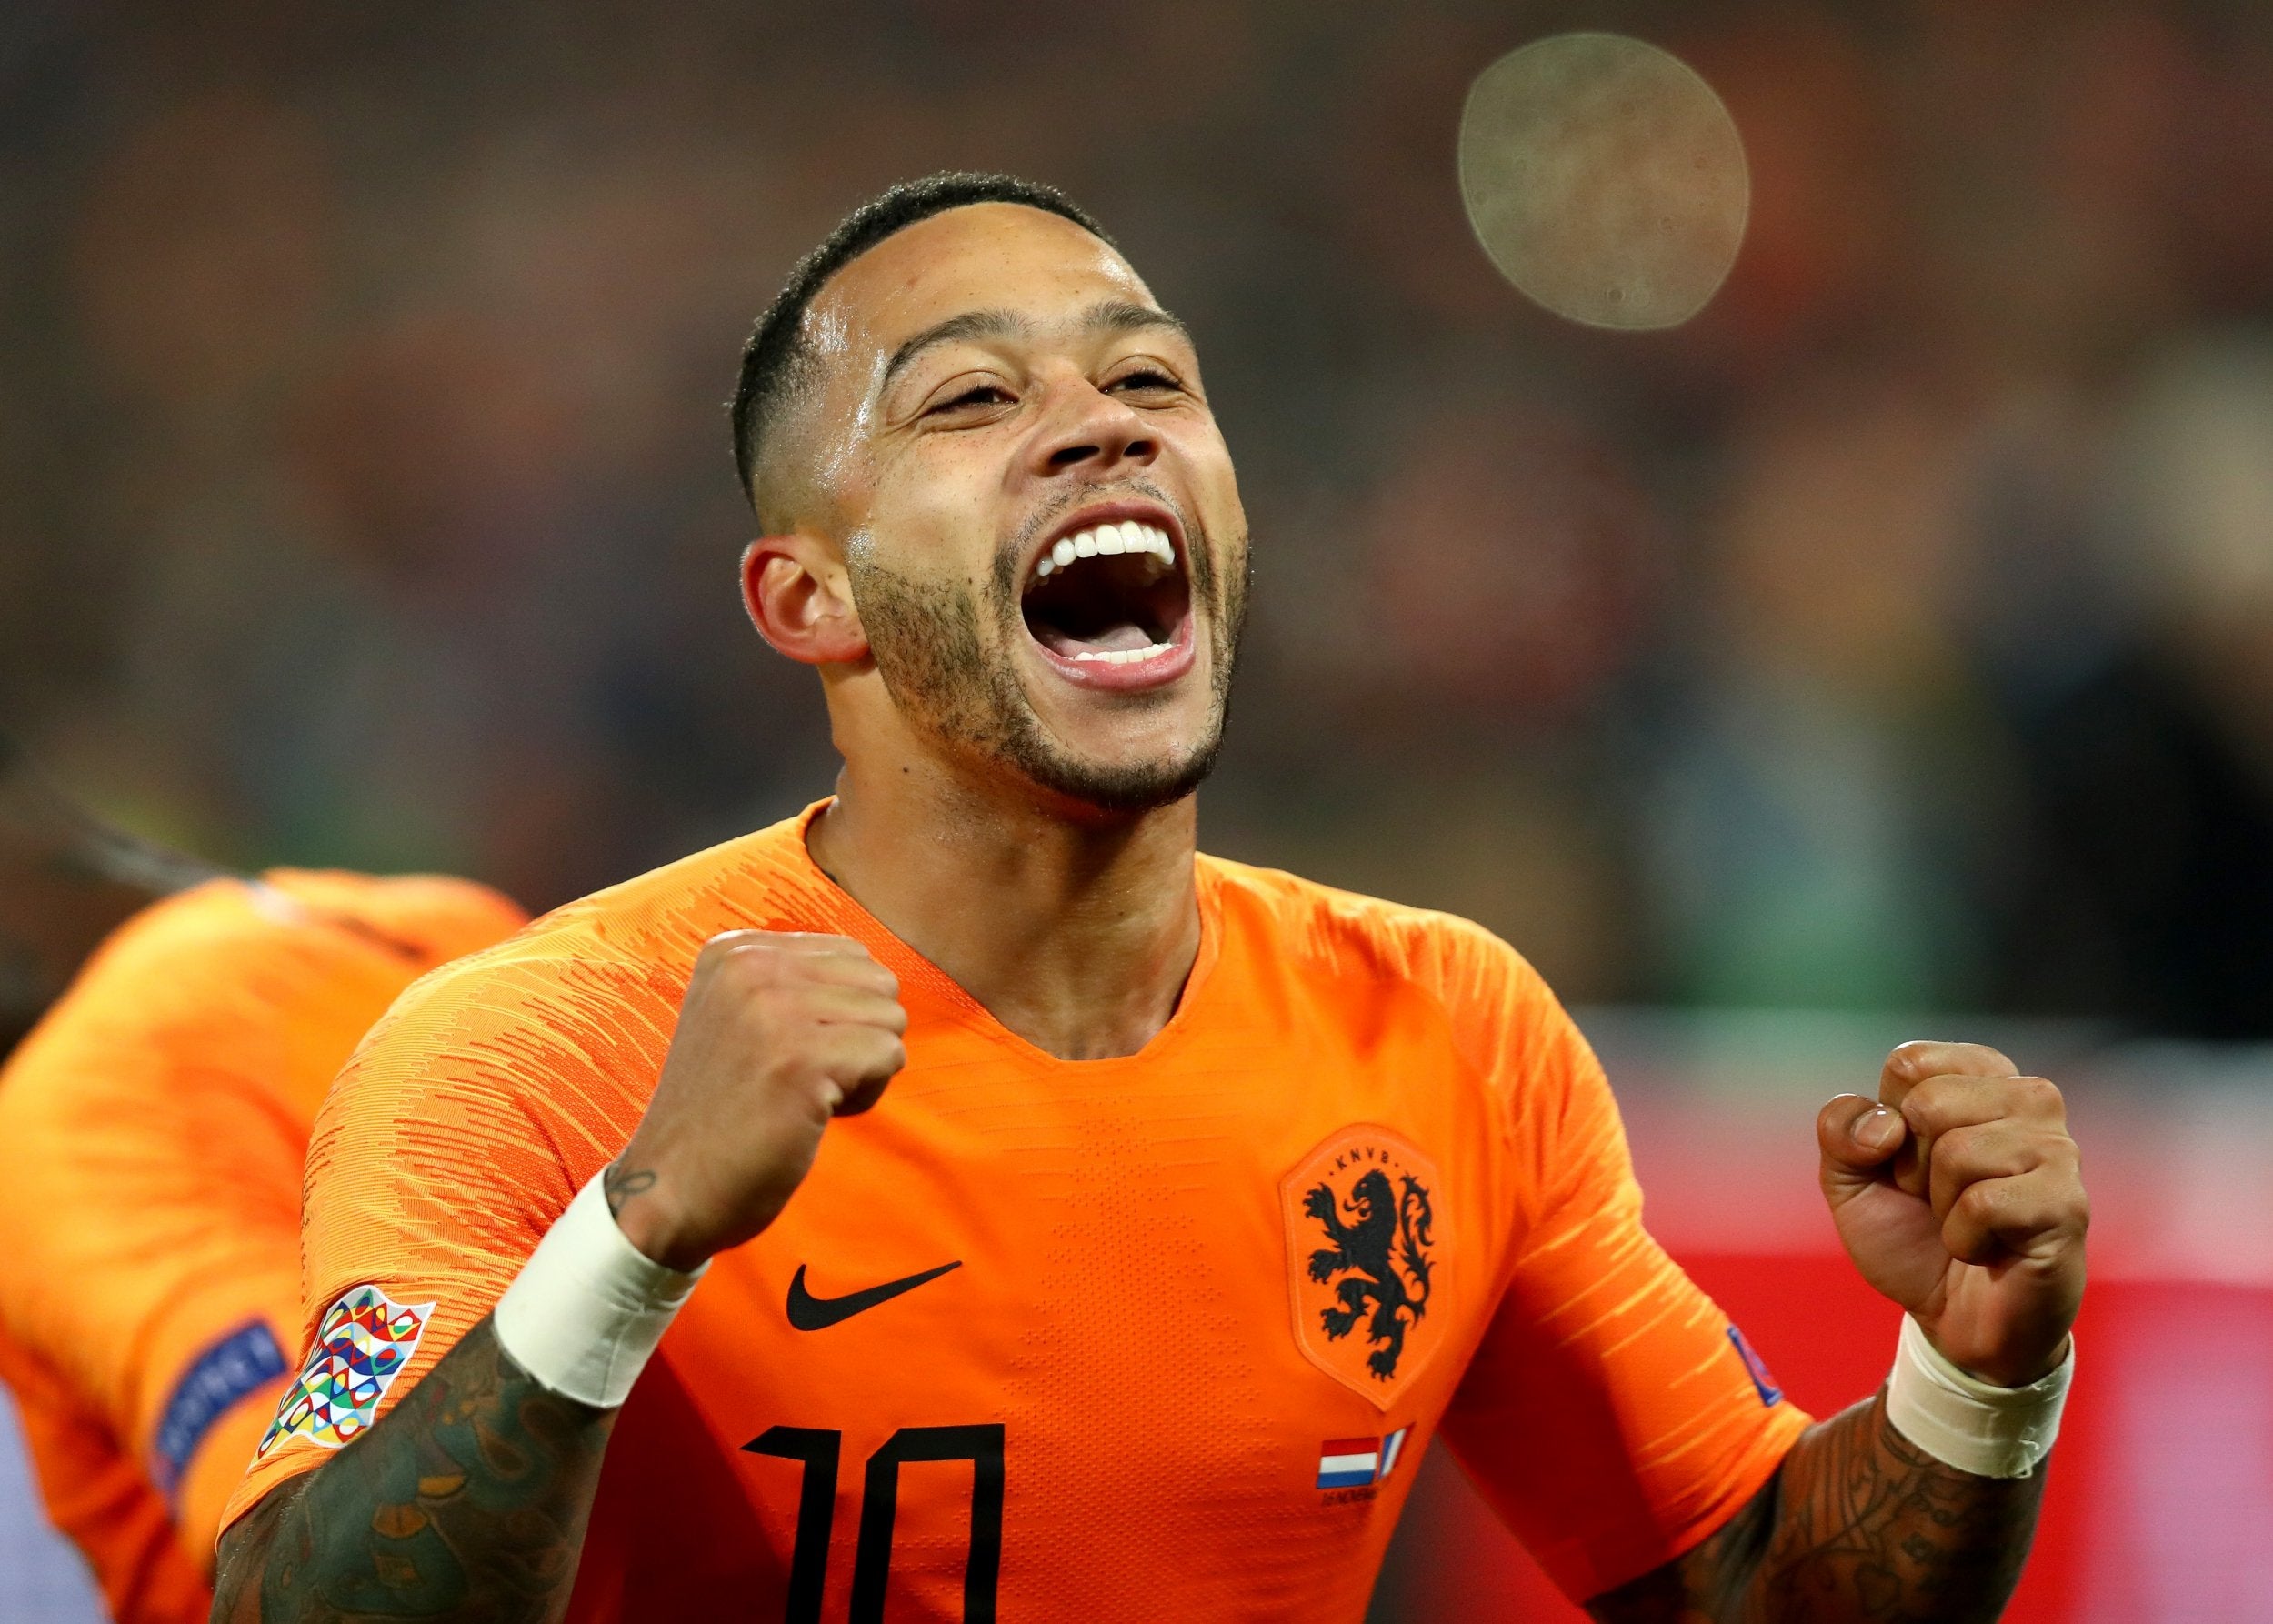 Memphis Depay secured victory